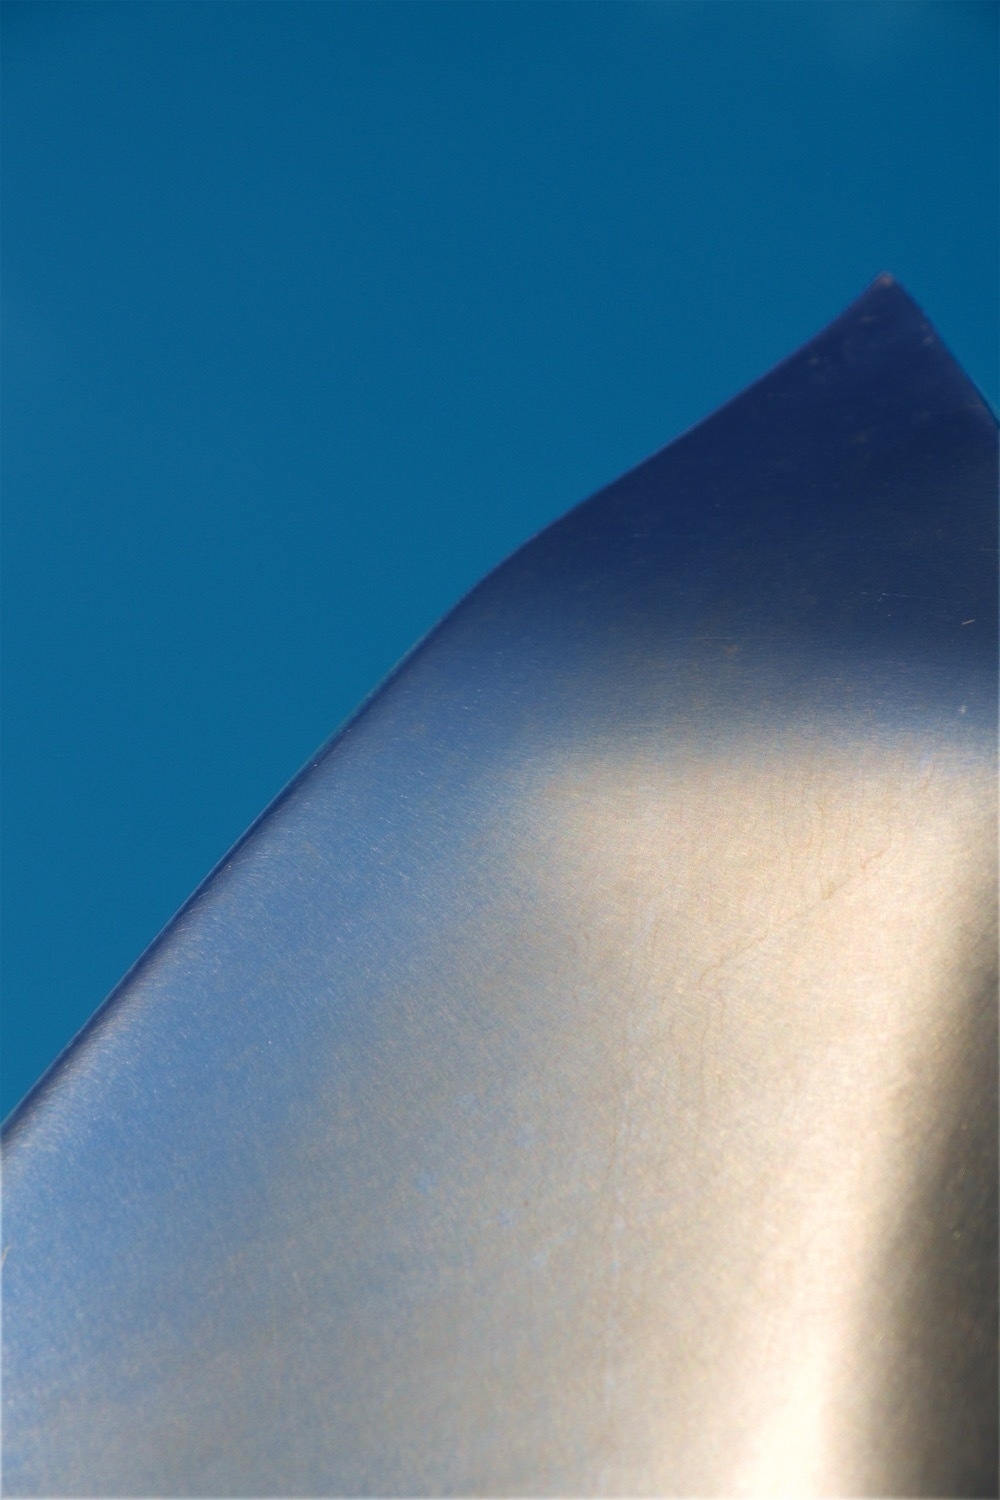 A close up of a steel sculpture. The background is a uniform, blue sky. The sun is reflecting in the sculpture in yellow and orange. Scratches in the steel give some structure to the image.